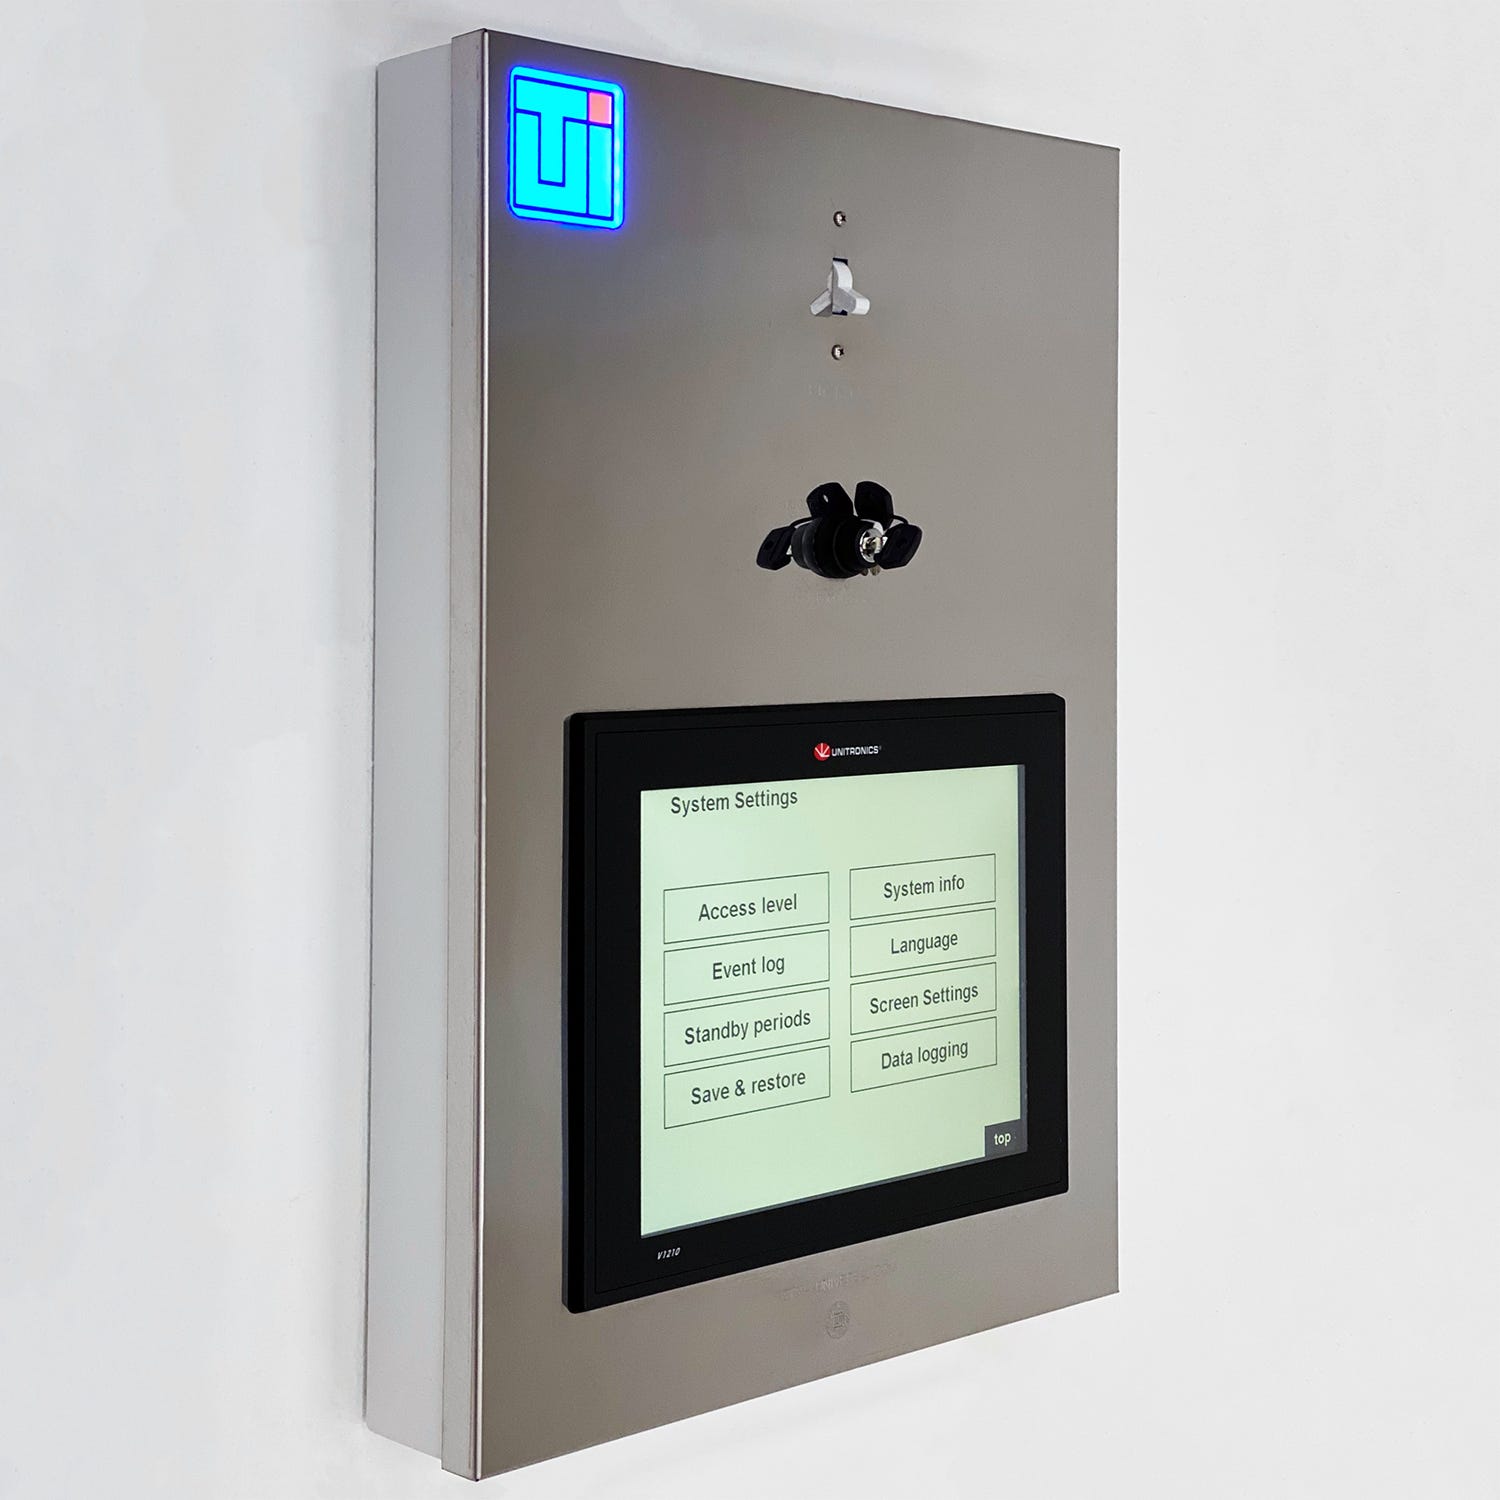 Cleanroom control panel with touchscreen and automated environmental monitoring and control